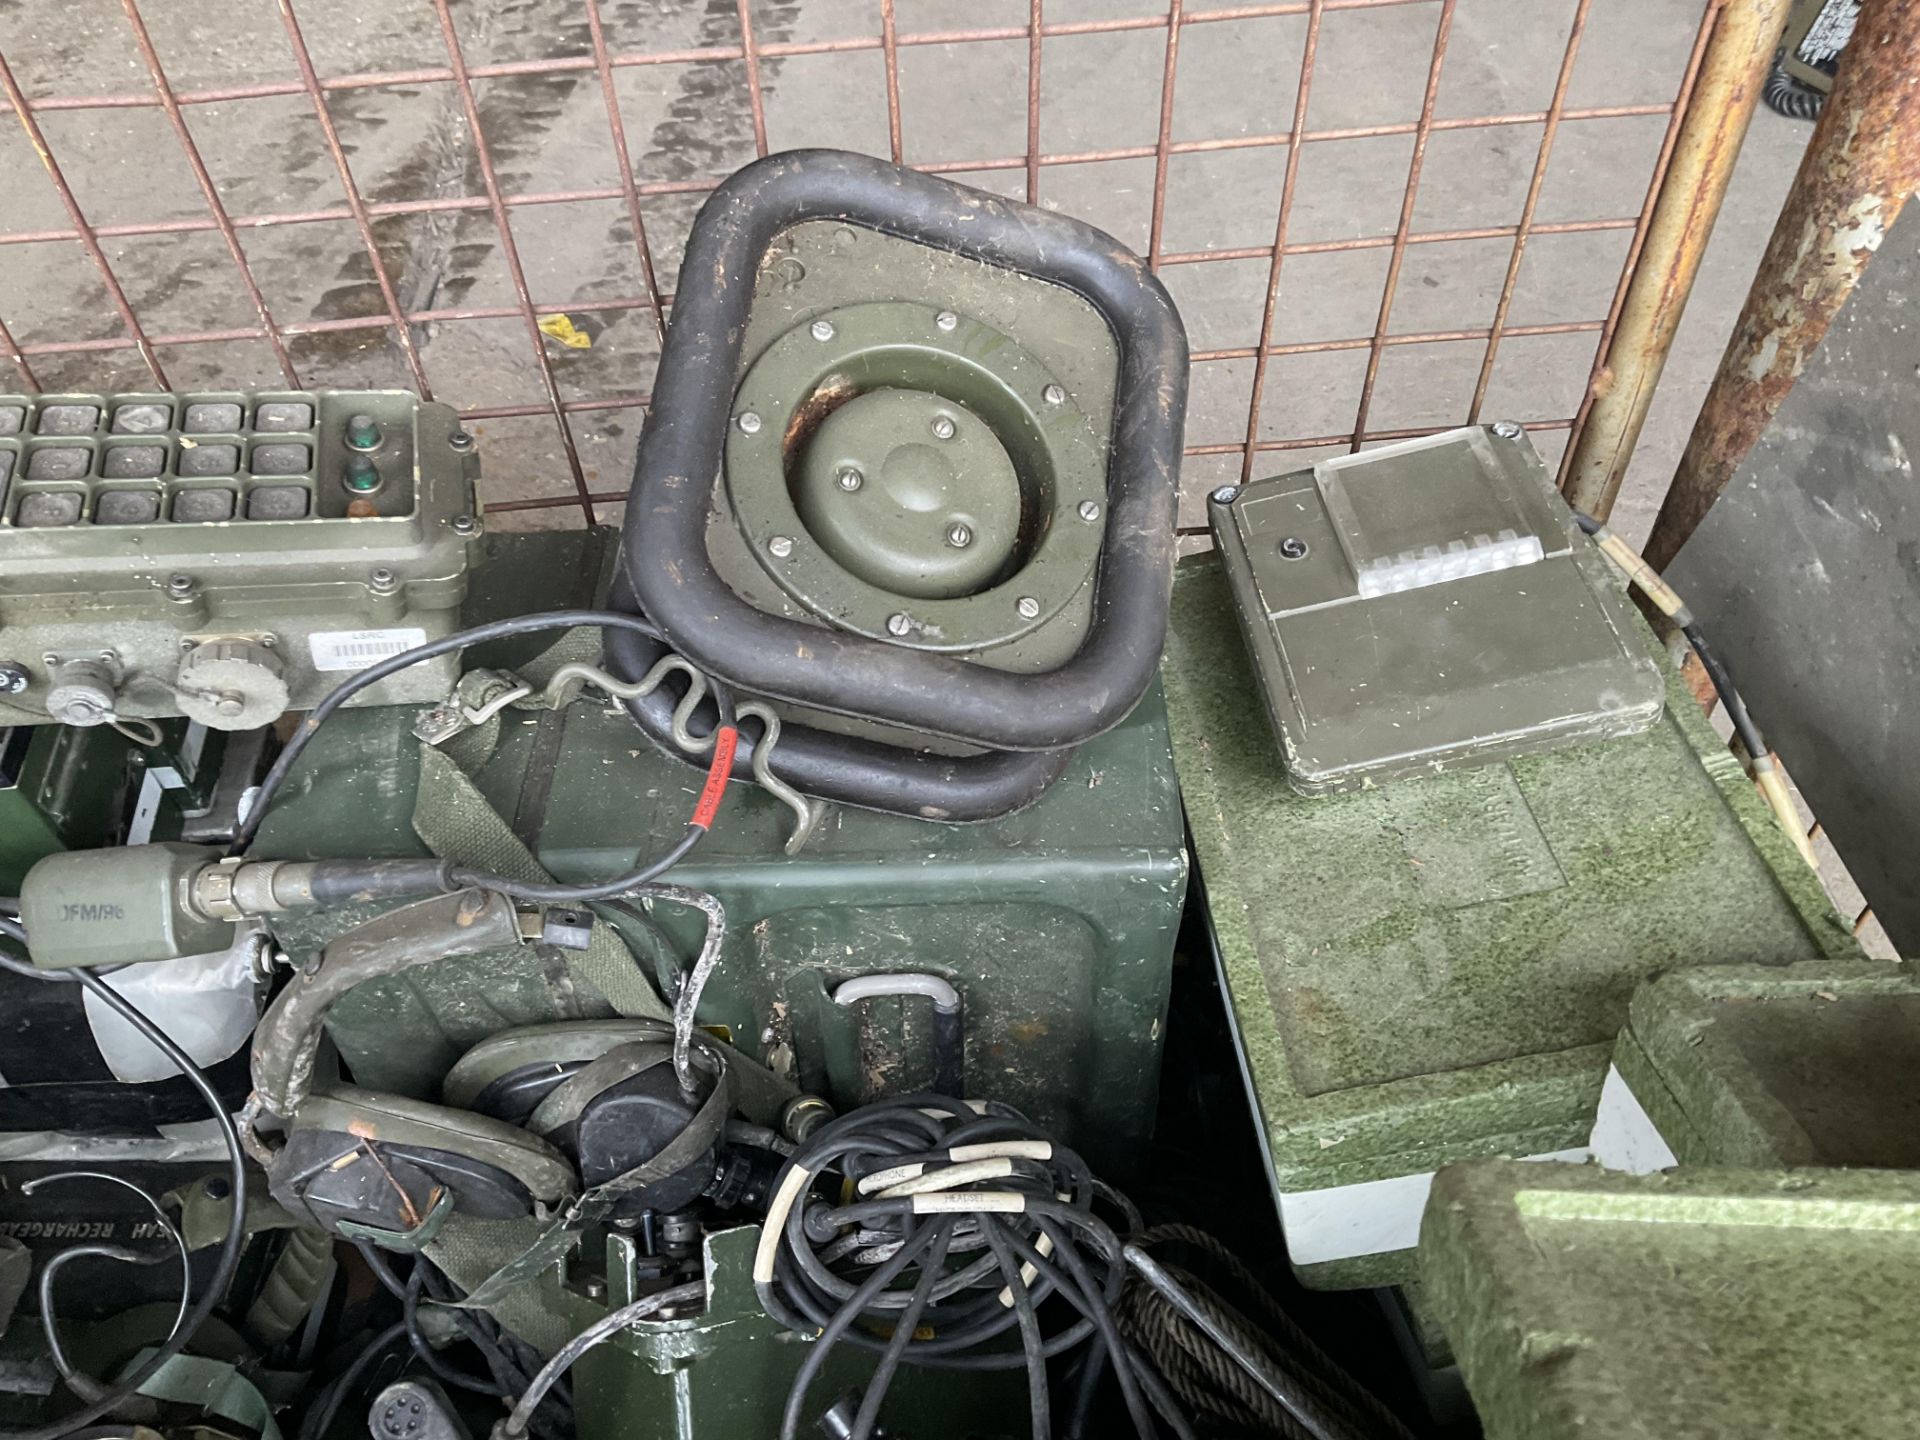 1X STILLAGE OF CLANSMAN RADIO EQUIPMENT, LOUD SPEAKERS, CABLE, HEADSETS, ETC - Image 4 of 9